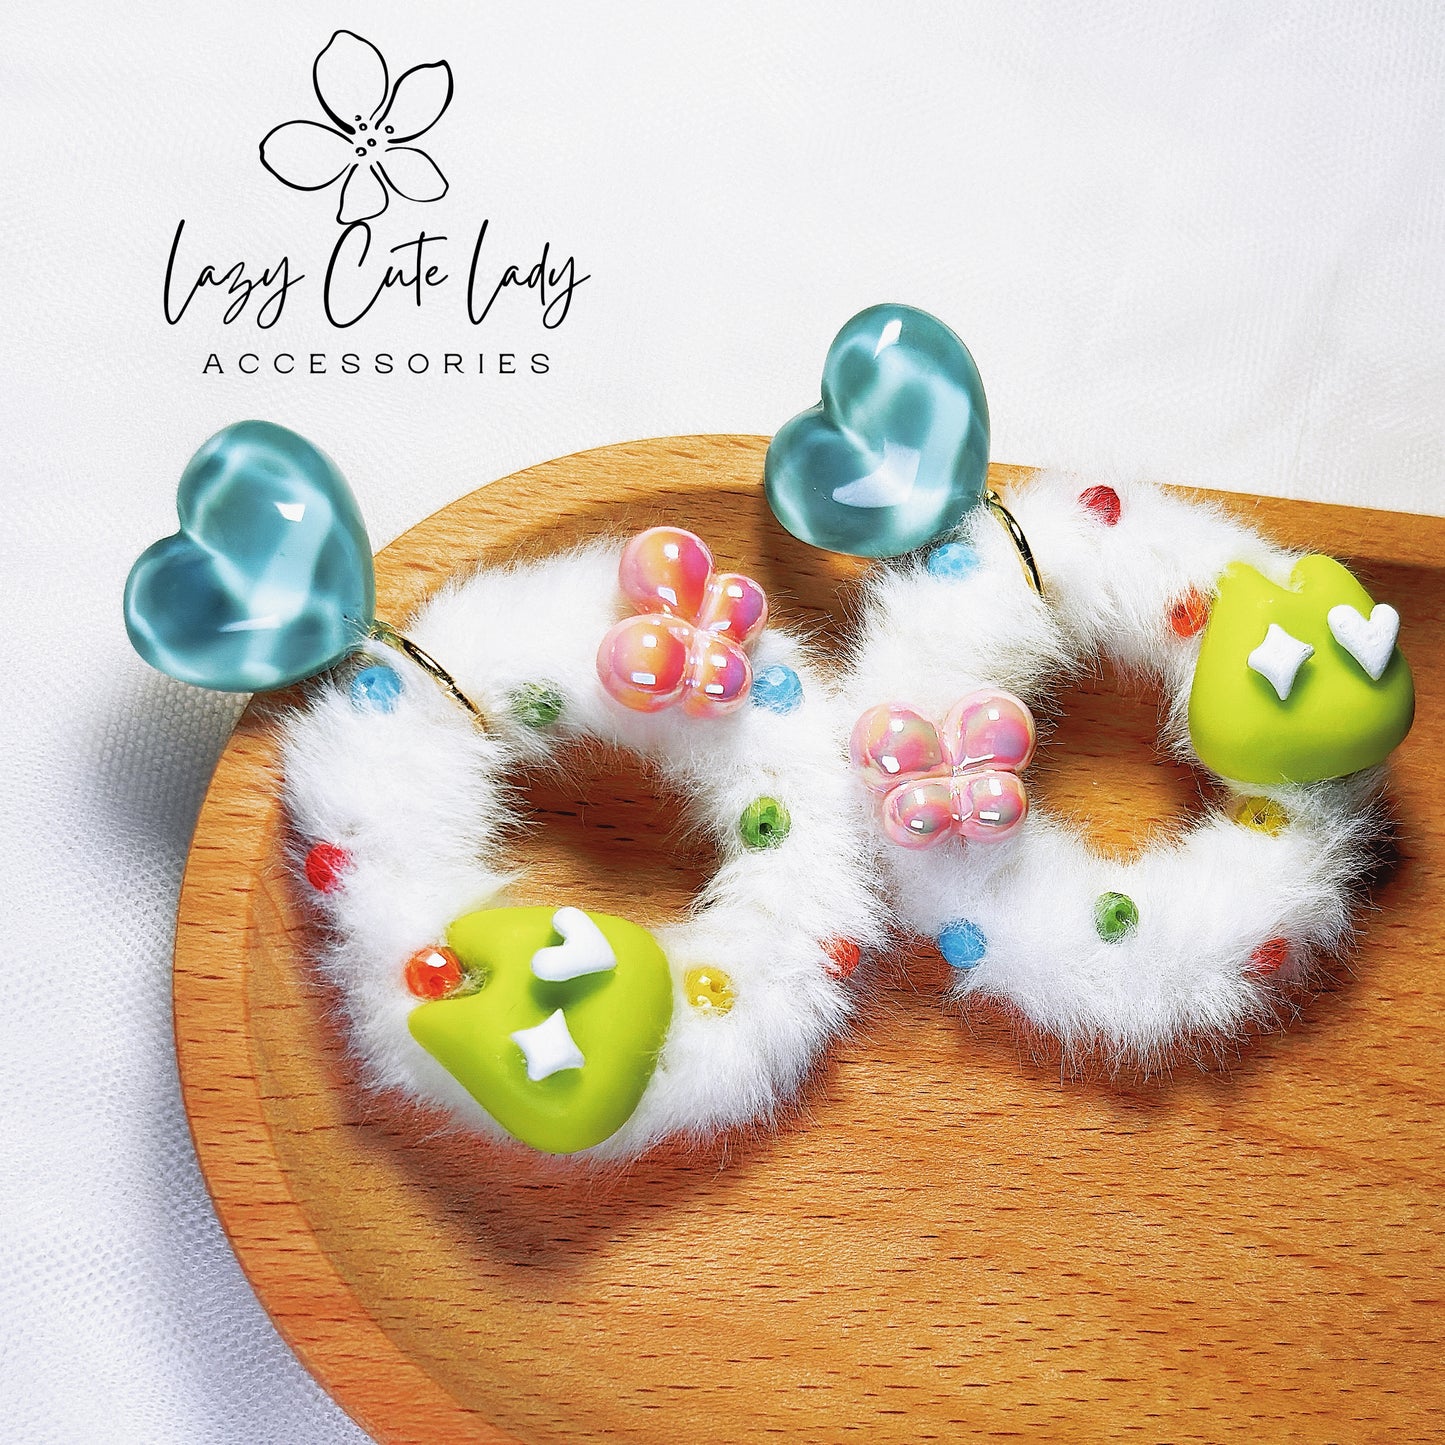 Playful Charm: Handcrafted Fluffy Earrings